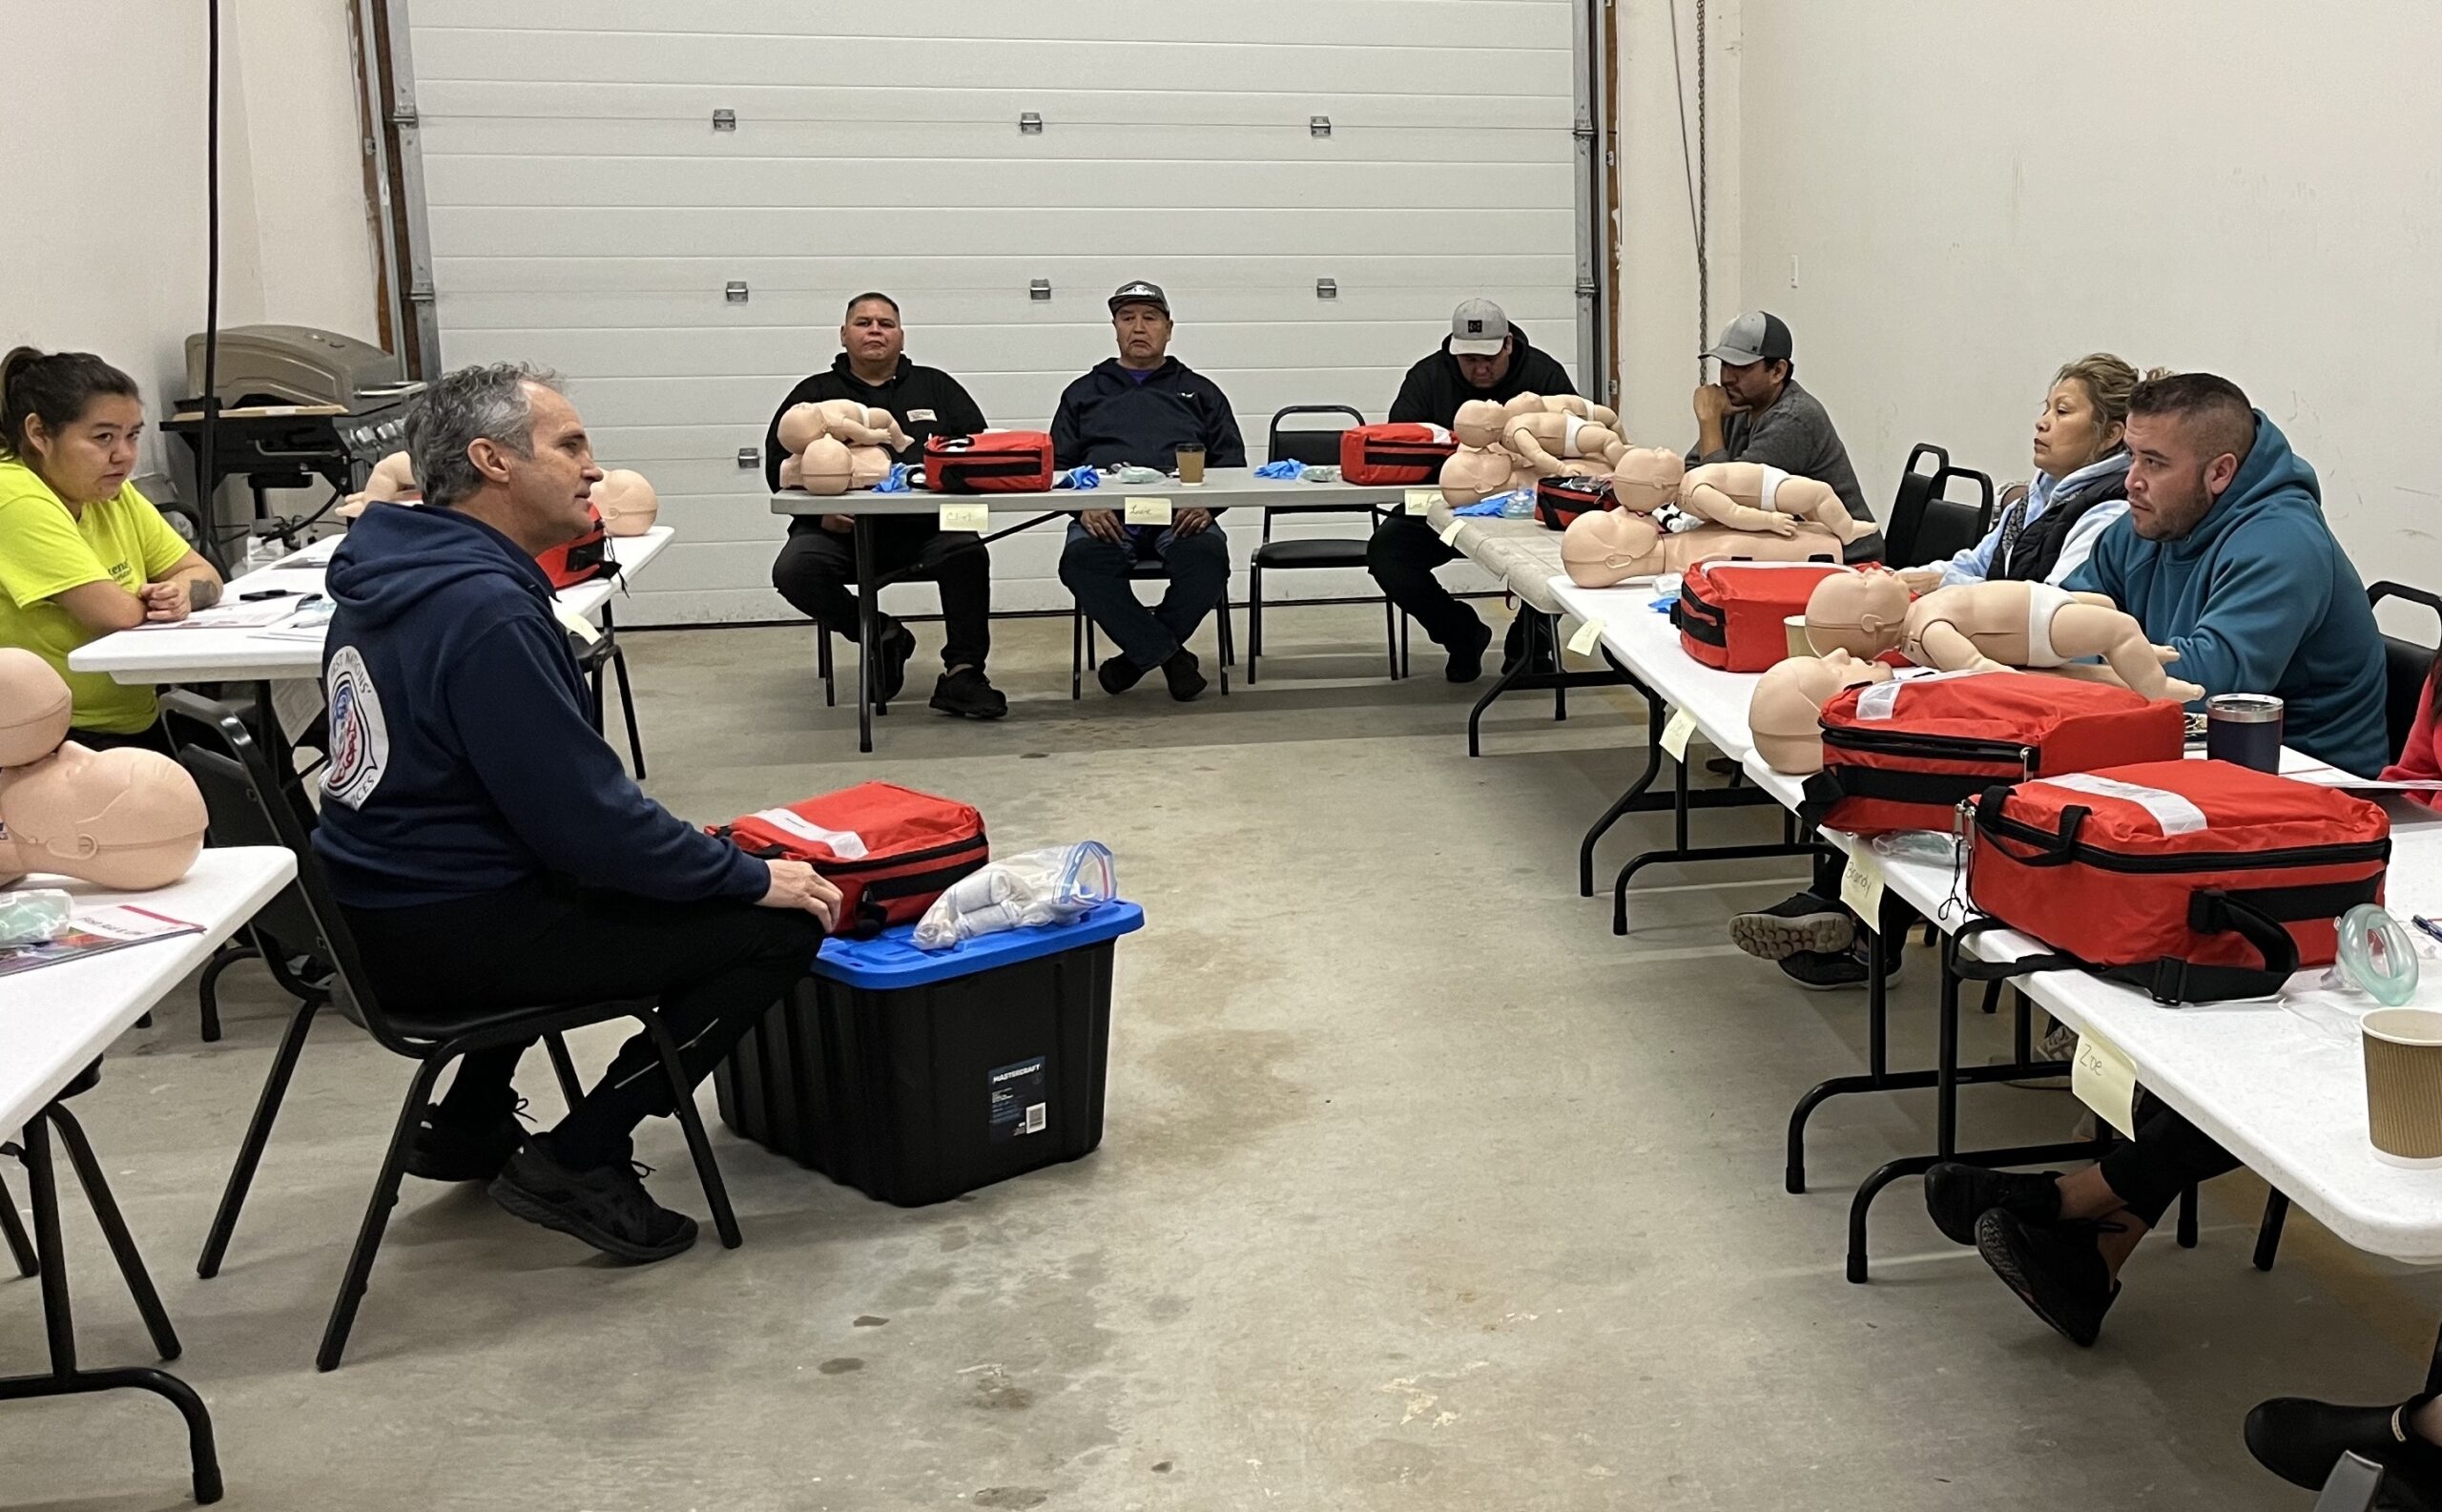 Reo delivering first aid training in Tla'amin First Nation